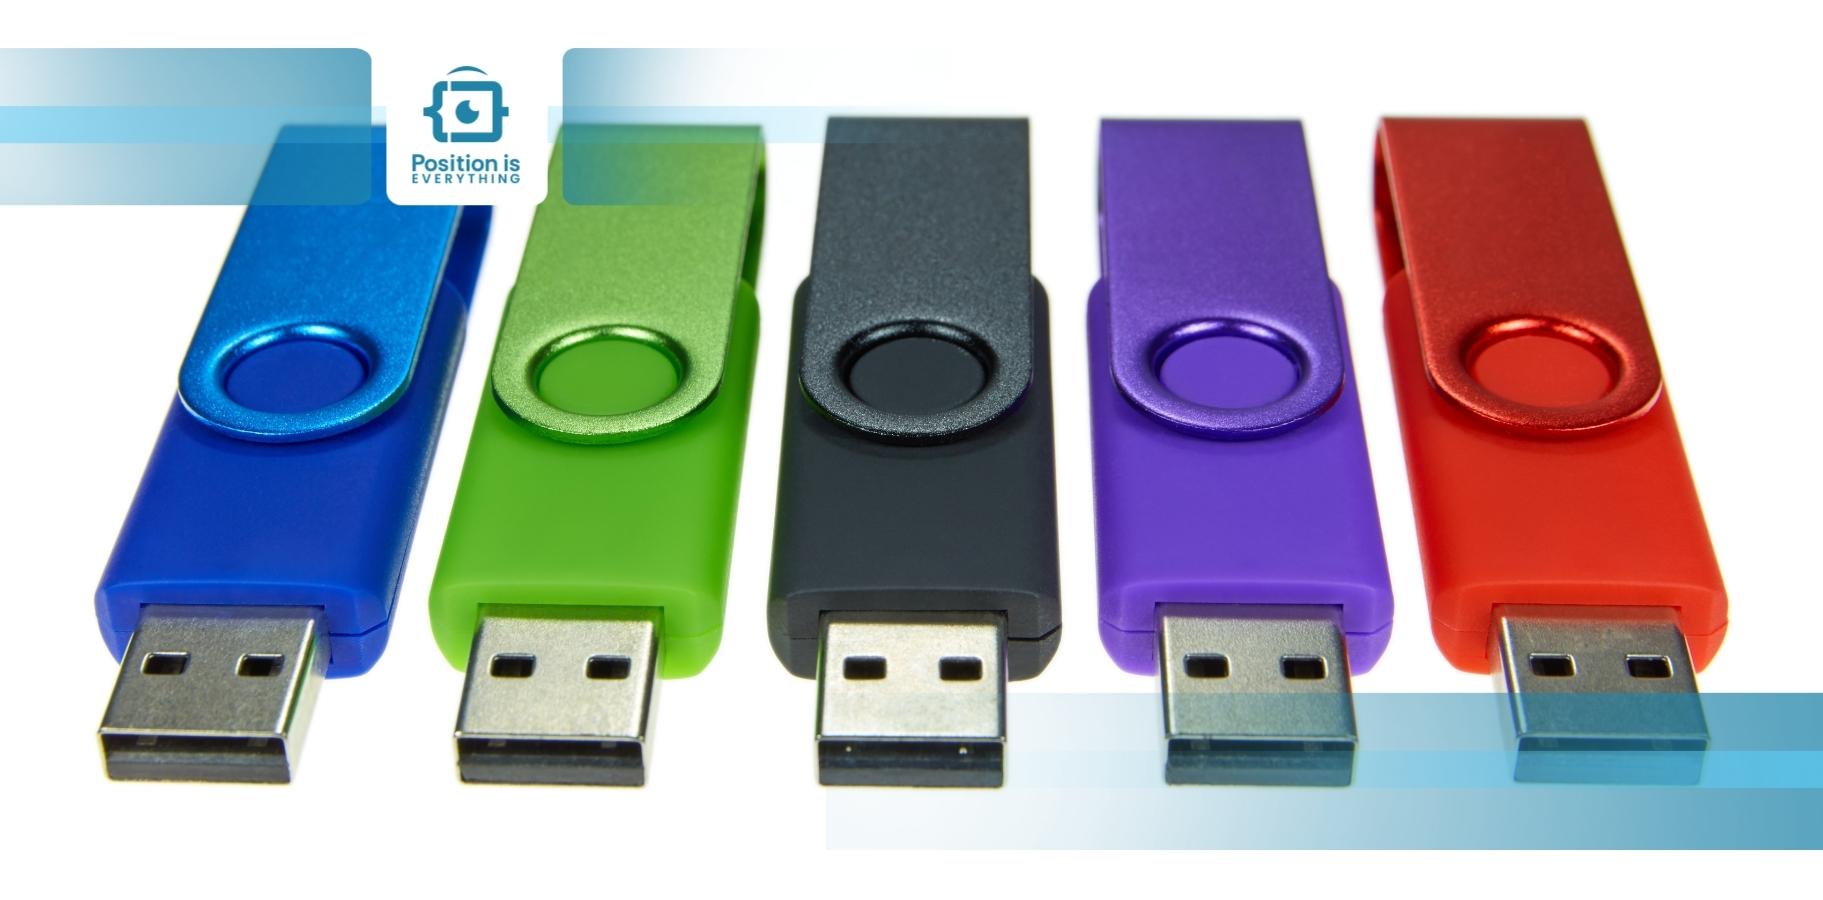 USB Color Code Meaning: A Color Codes With